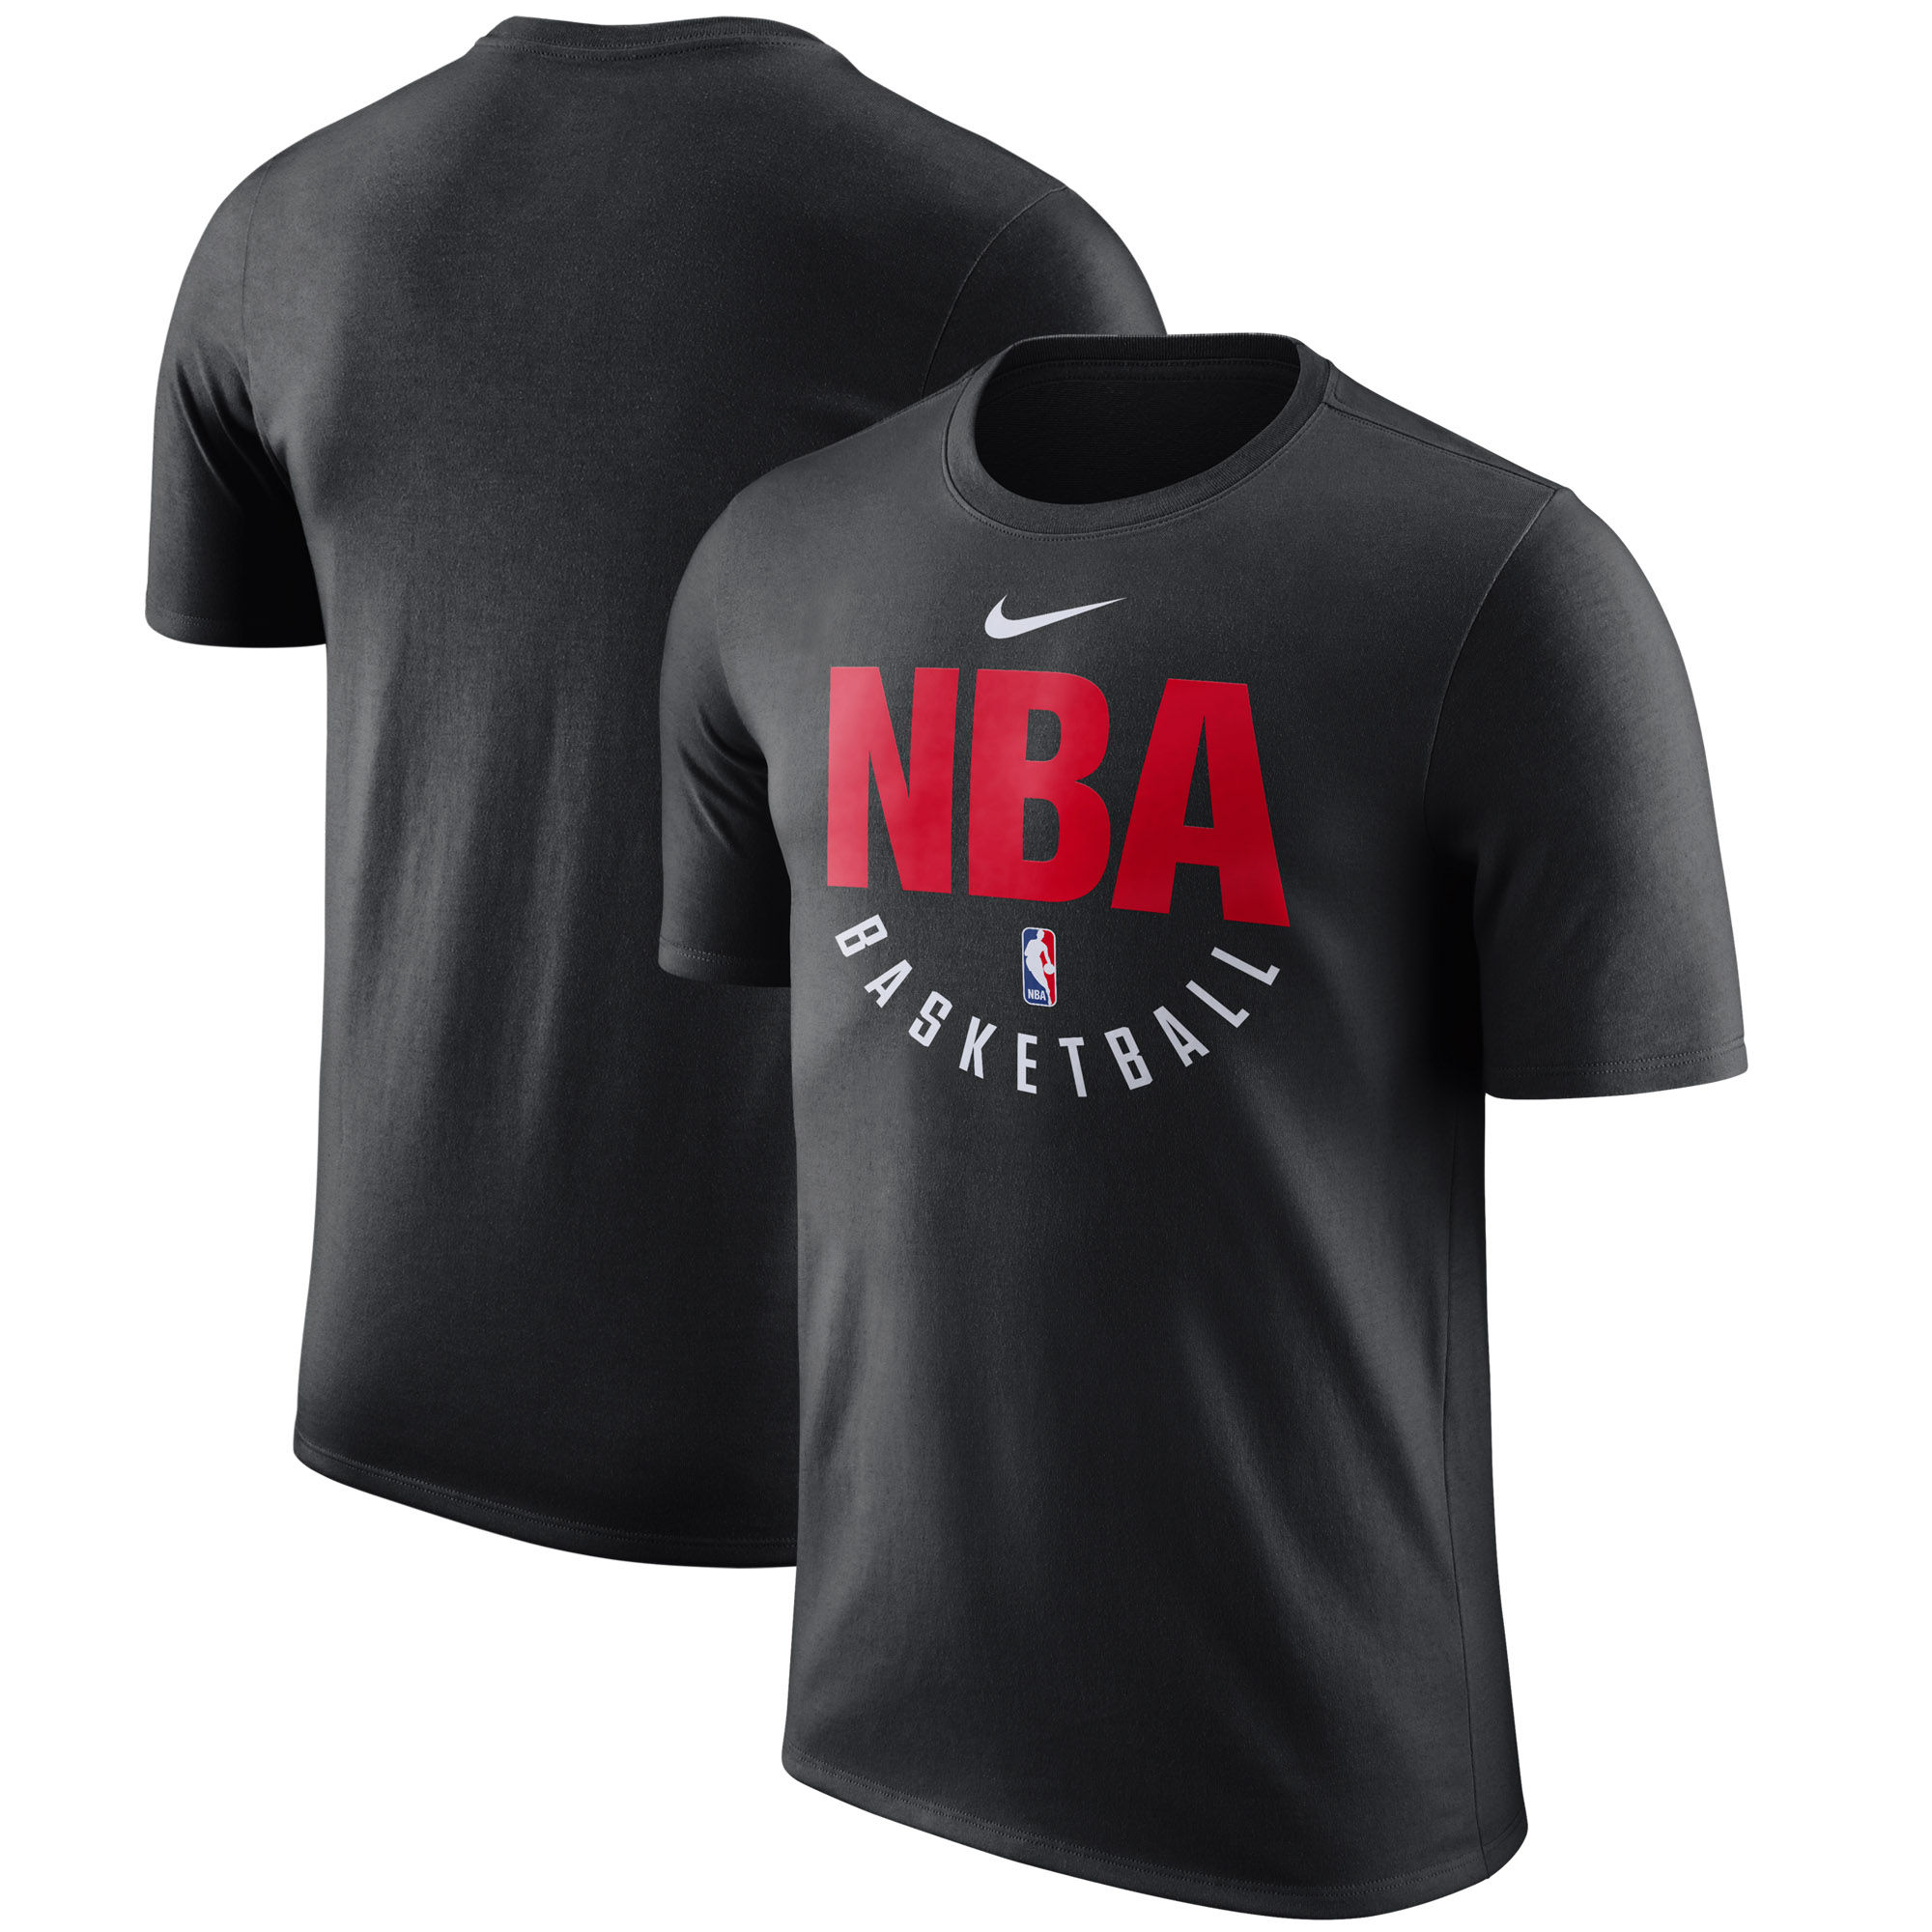 Nike NBA Logo Gear Black Essential Performance Practice T-Shirt - Click Image to Close